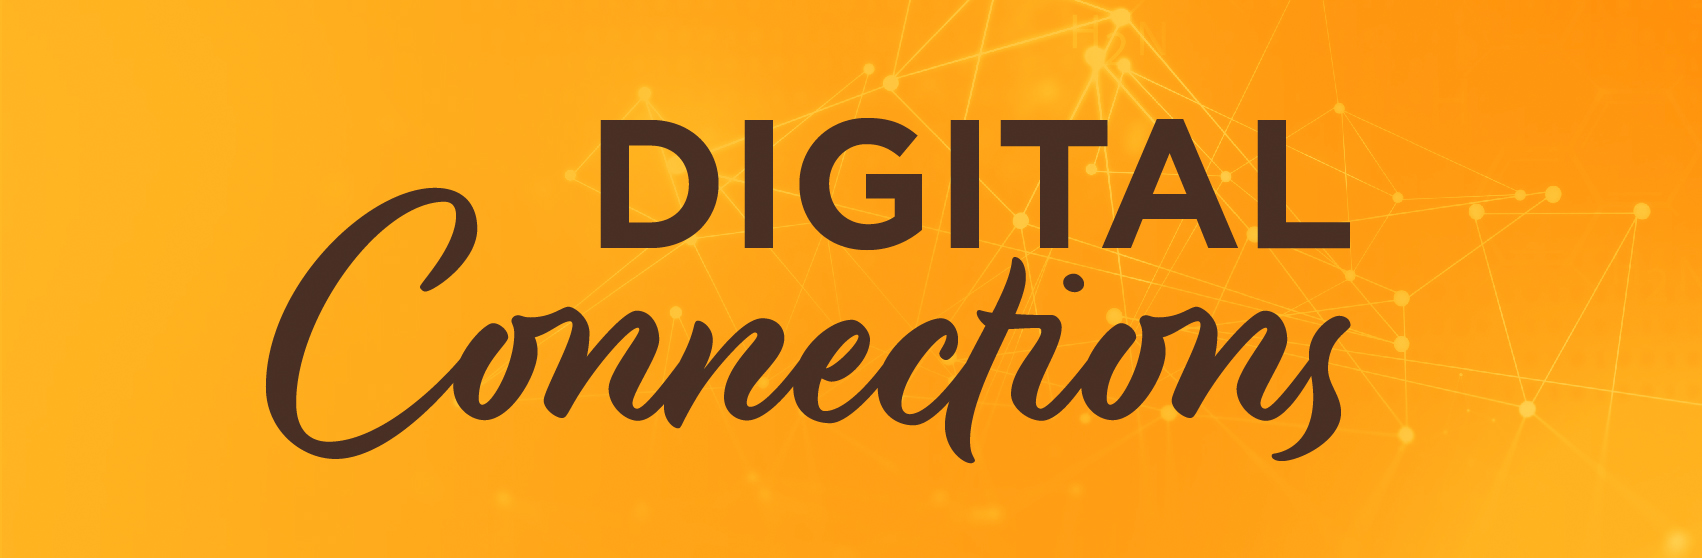 Digital Connections: Stay connected virtually with the UWAA through a variety of digital content.